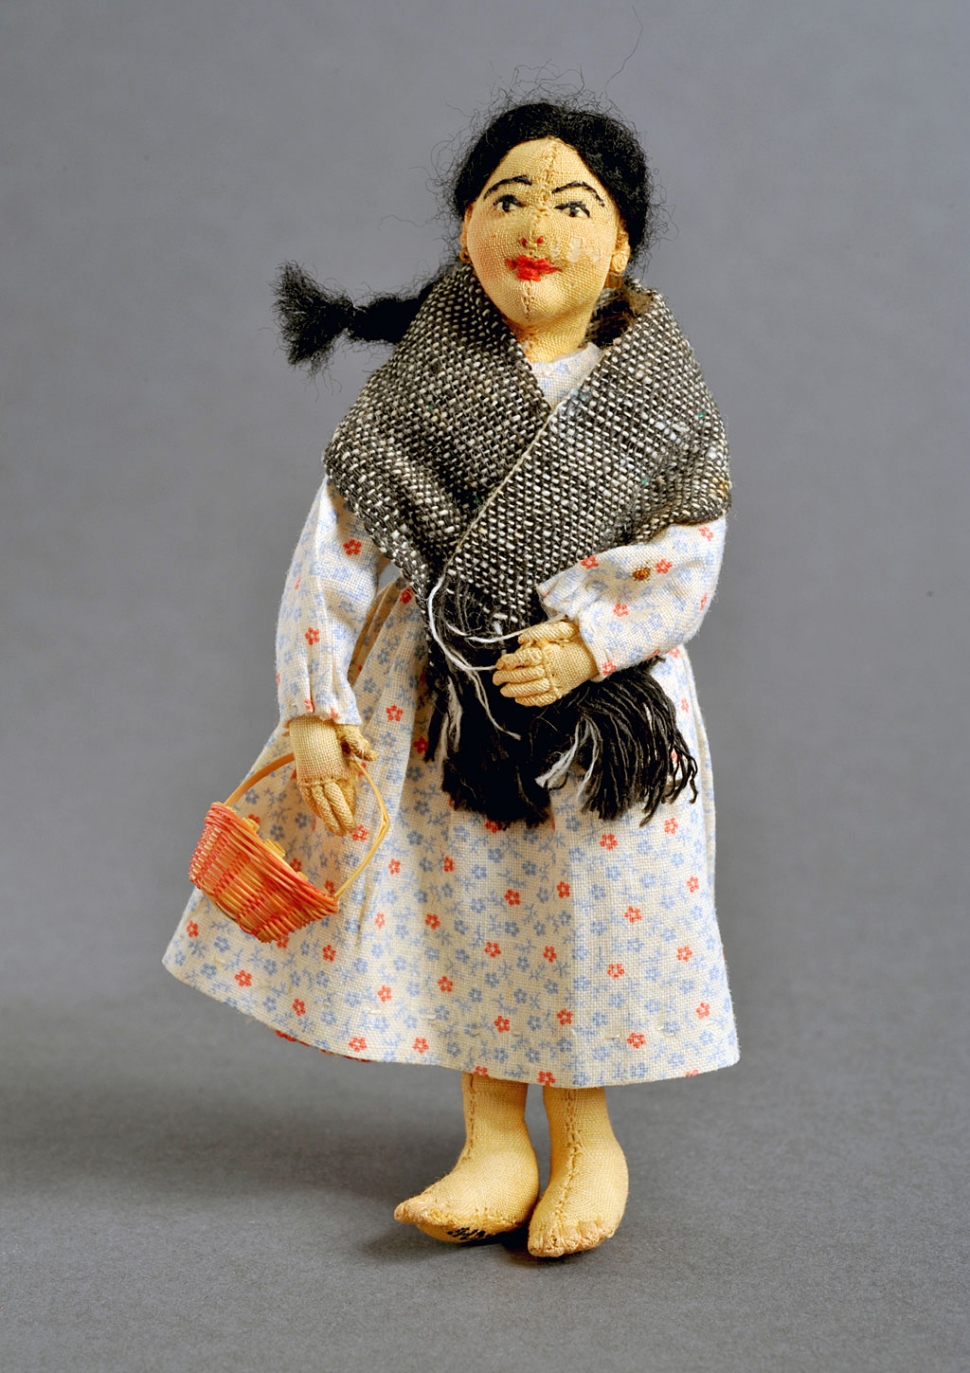 Handcrafted Doll by Maura Flores Olney